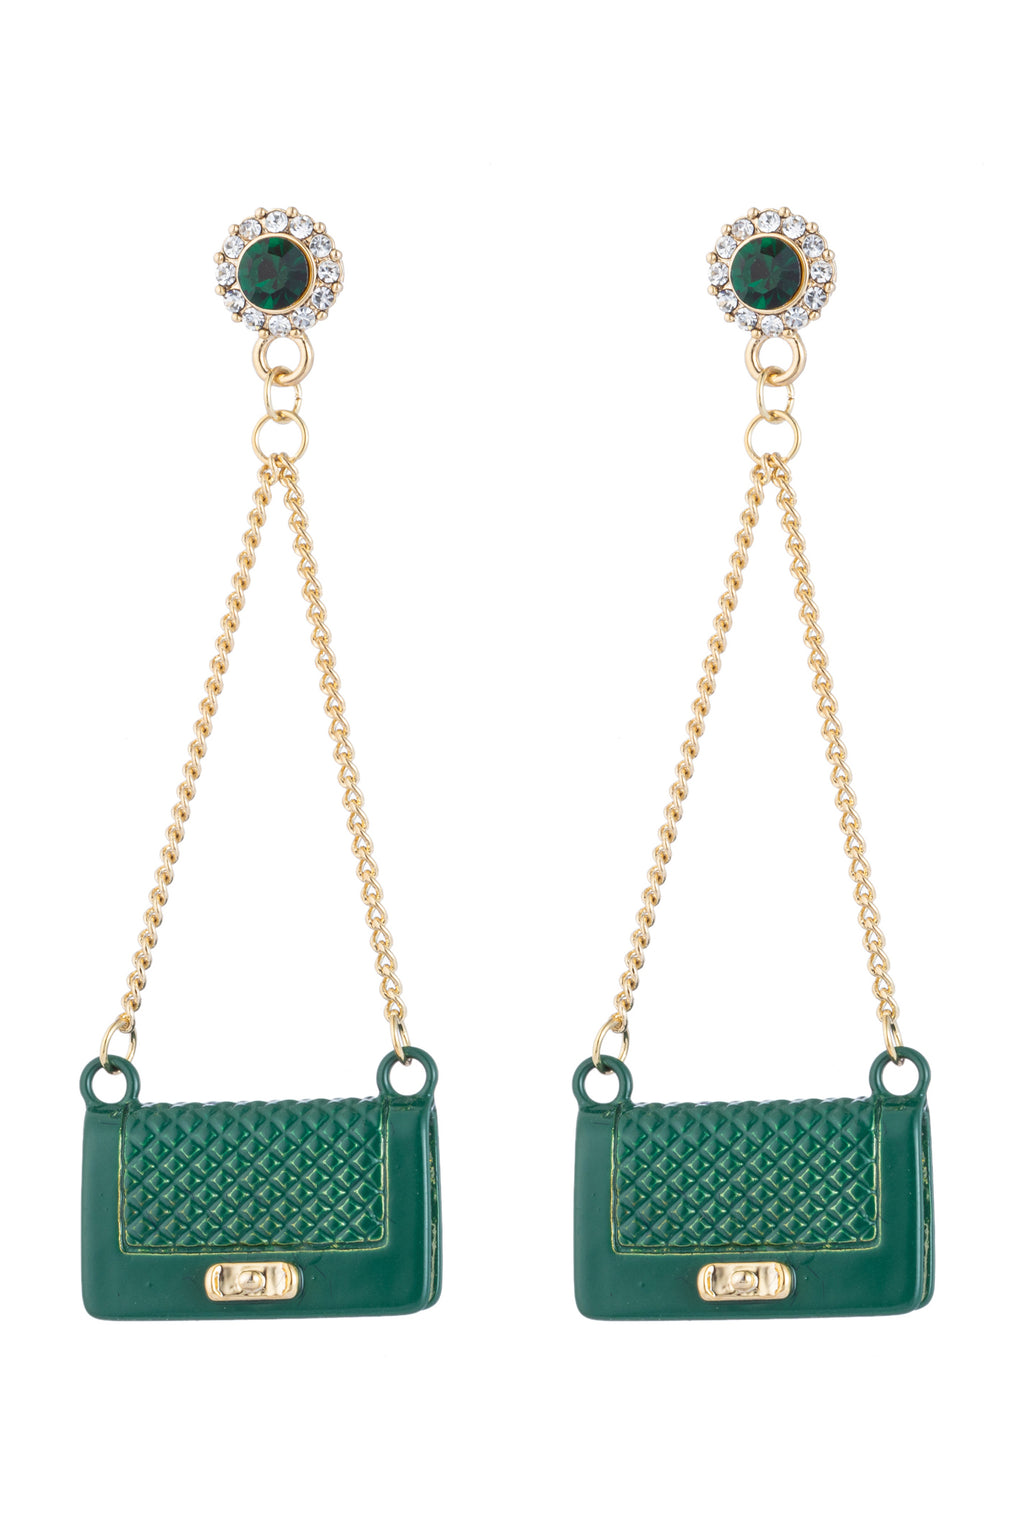 Green purse drop earrings studded with CZ crystals.